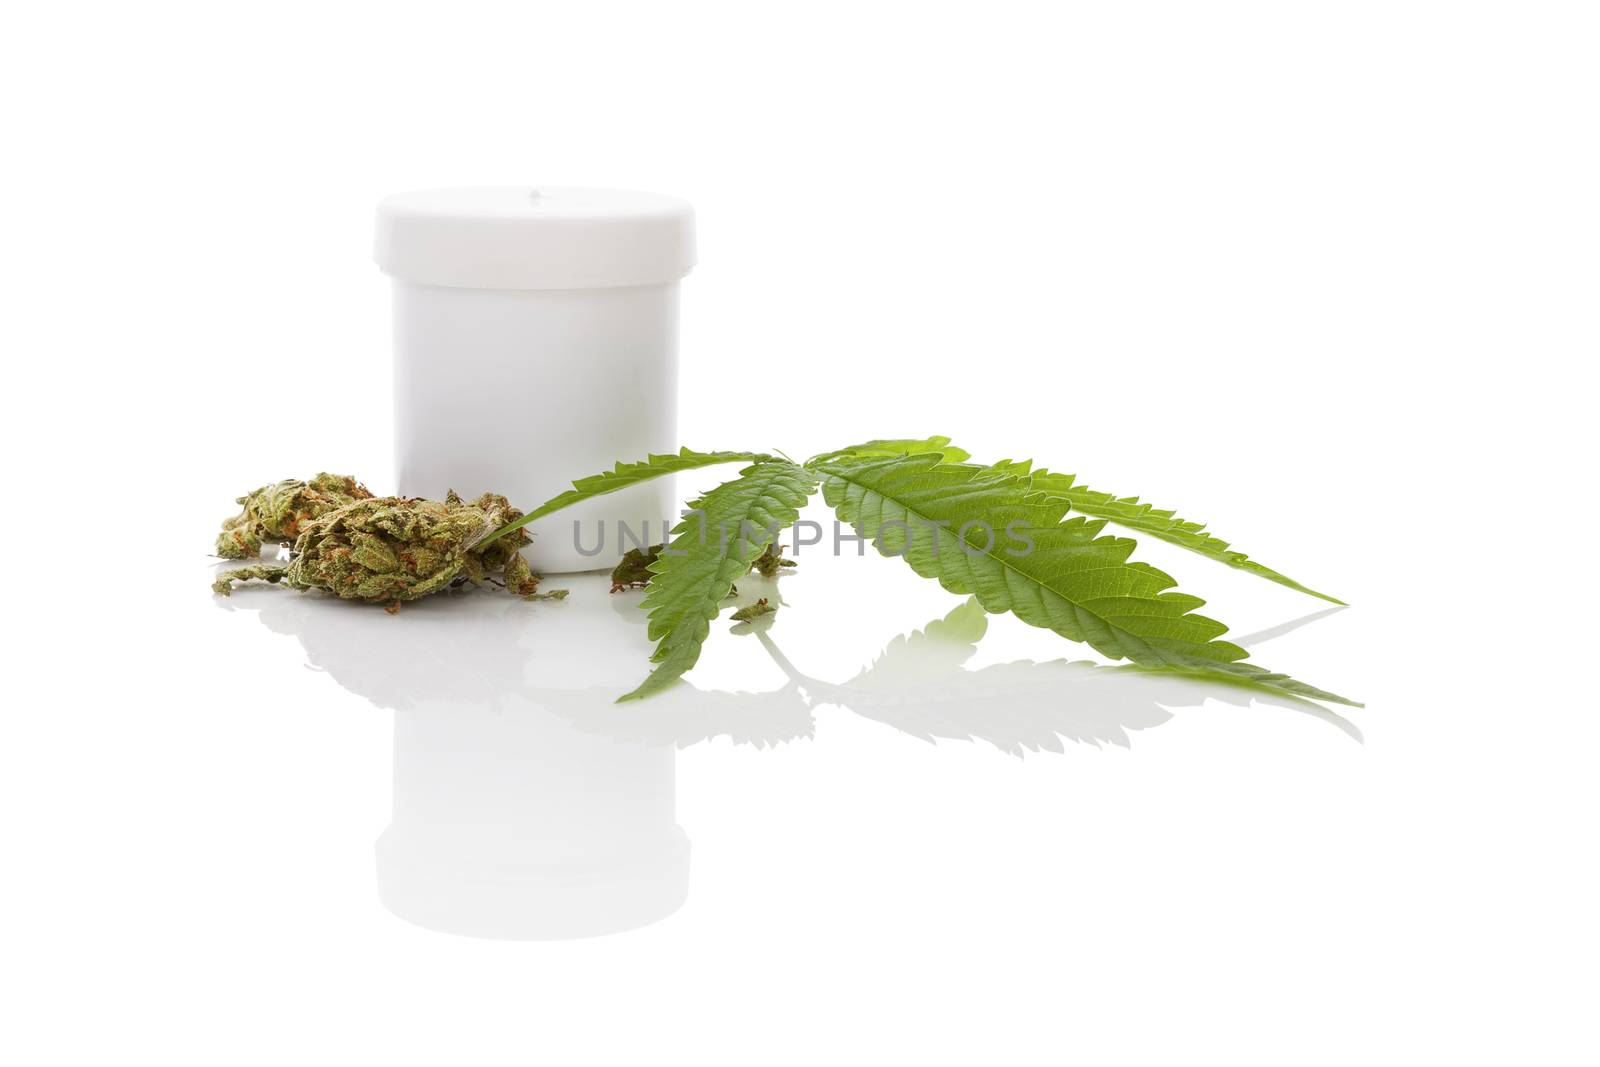 Medical marijuana. Cannabis bud and hemp leaf and white container isolated on white background with reflection